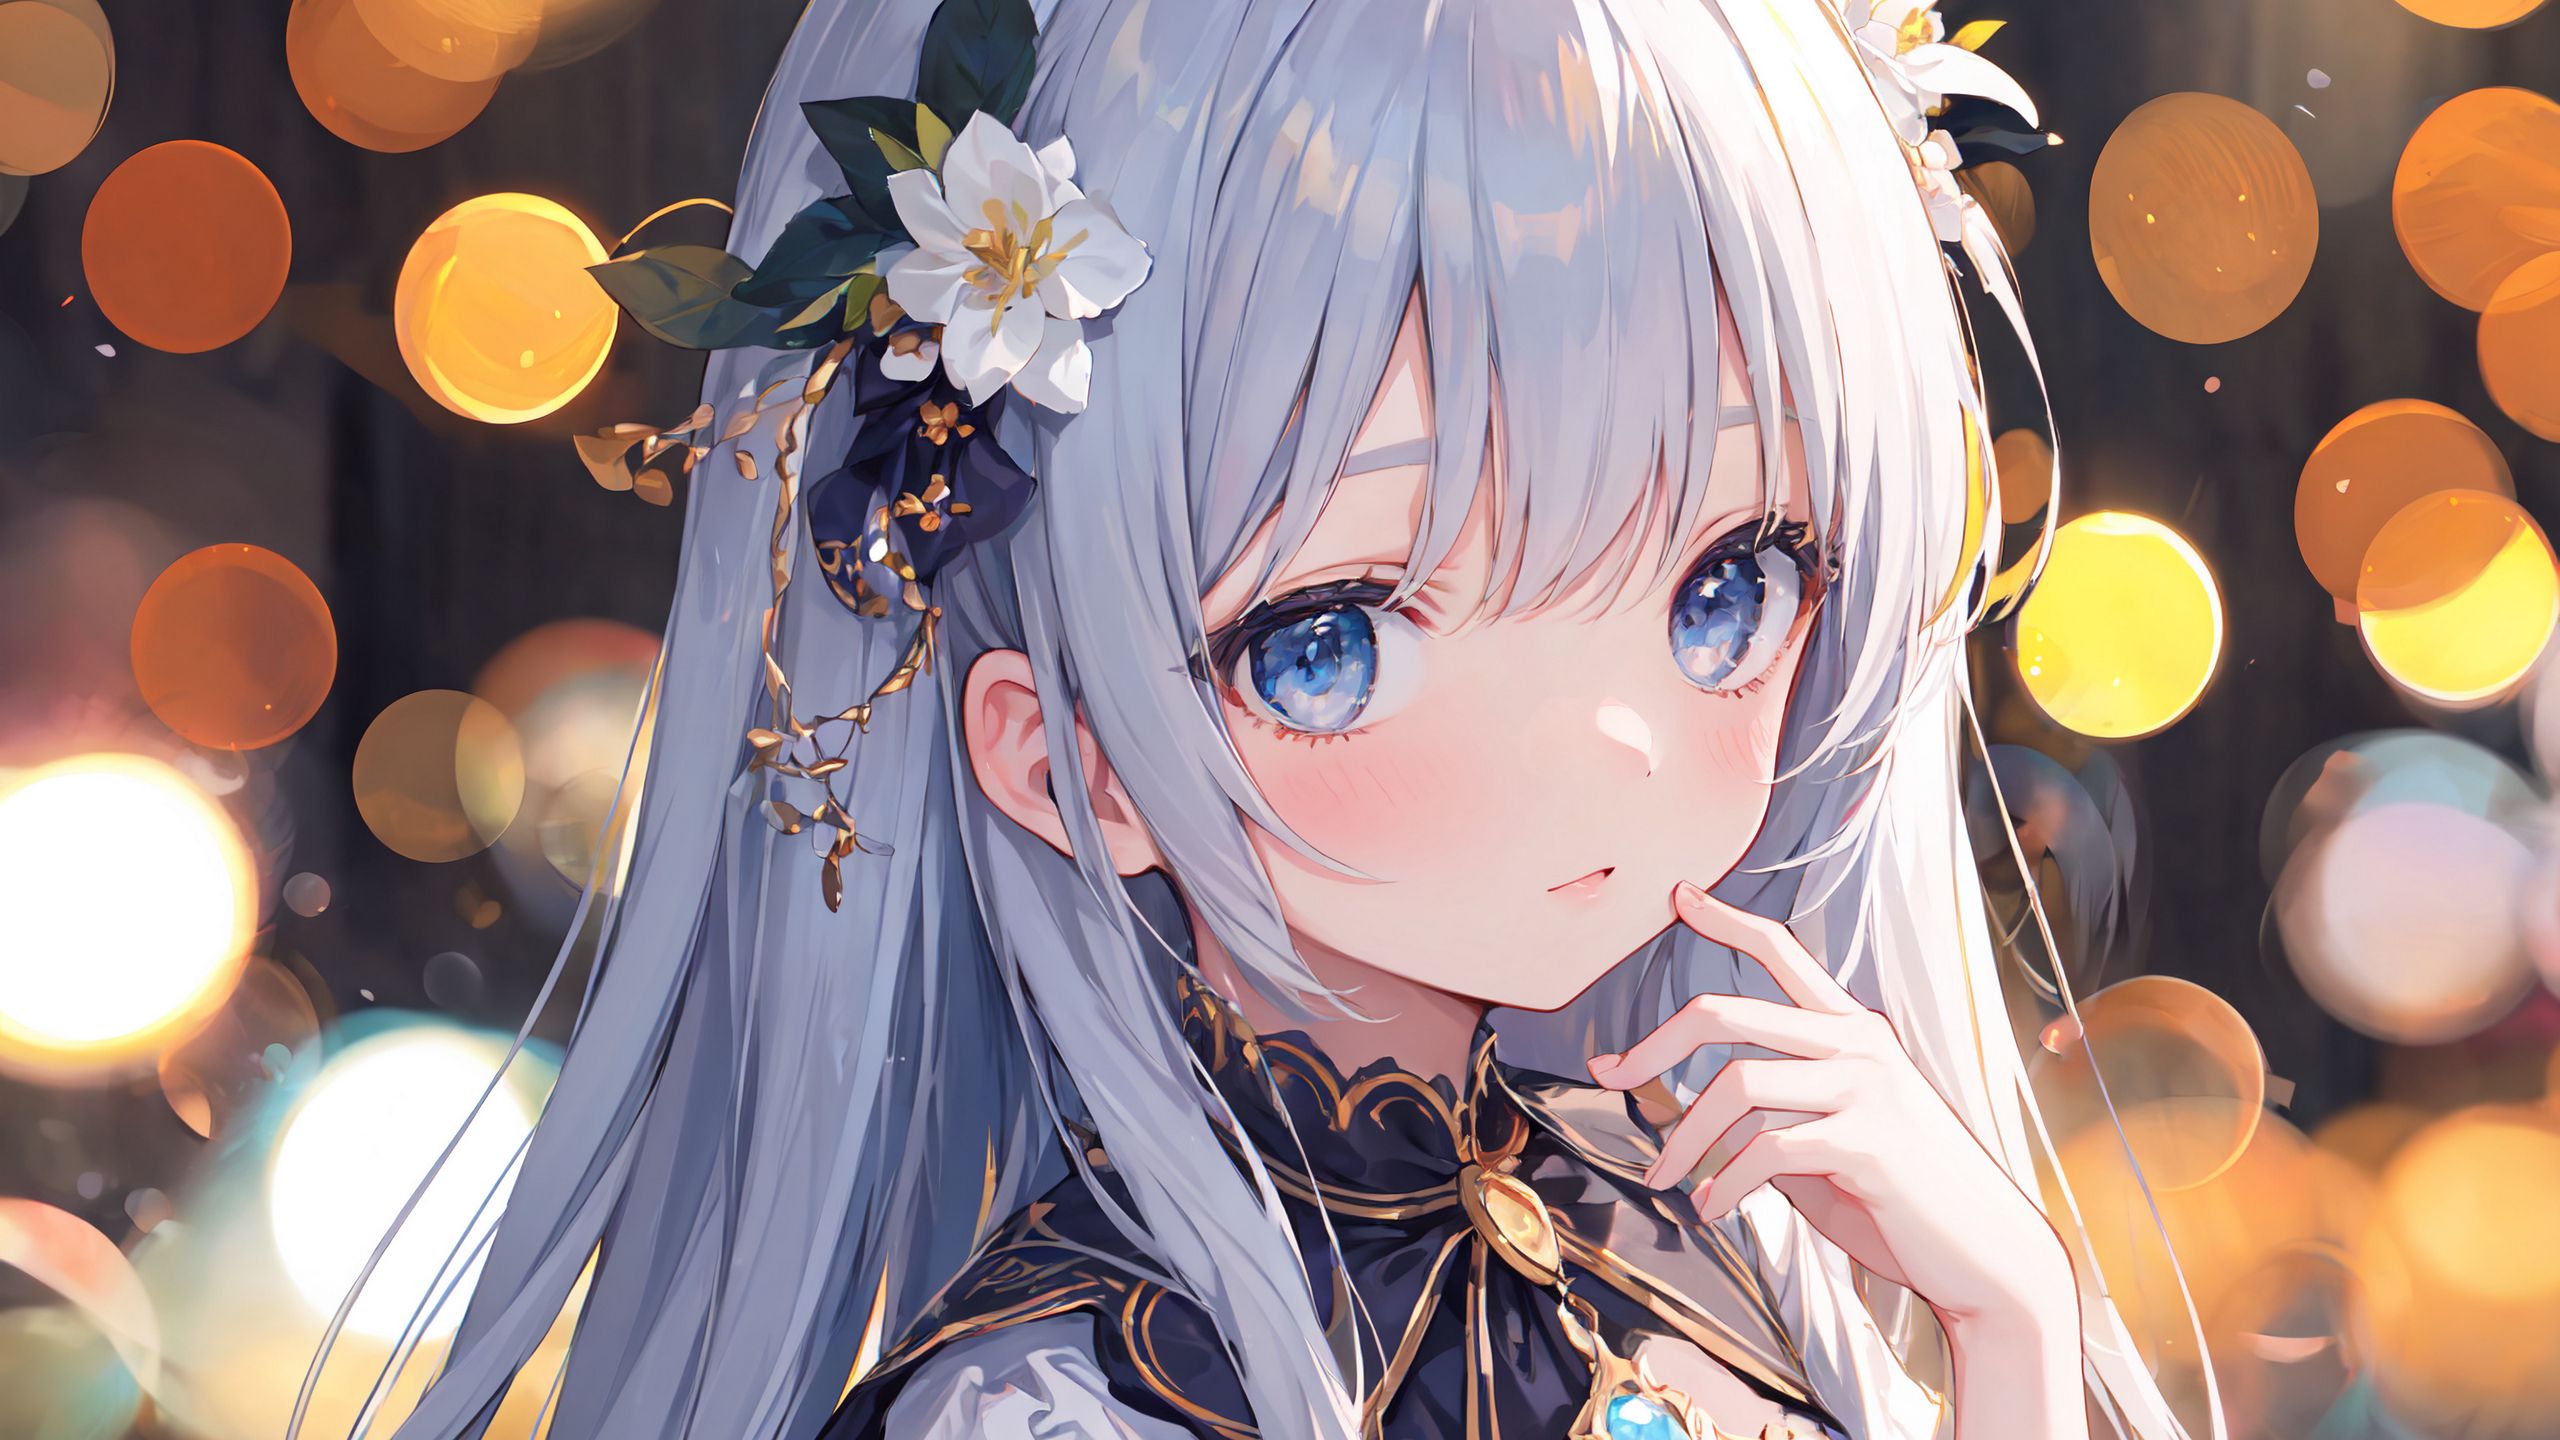 Download wallpaper 2560x1440 girl, flowers, hairpin, jewelry, anime ...